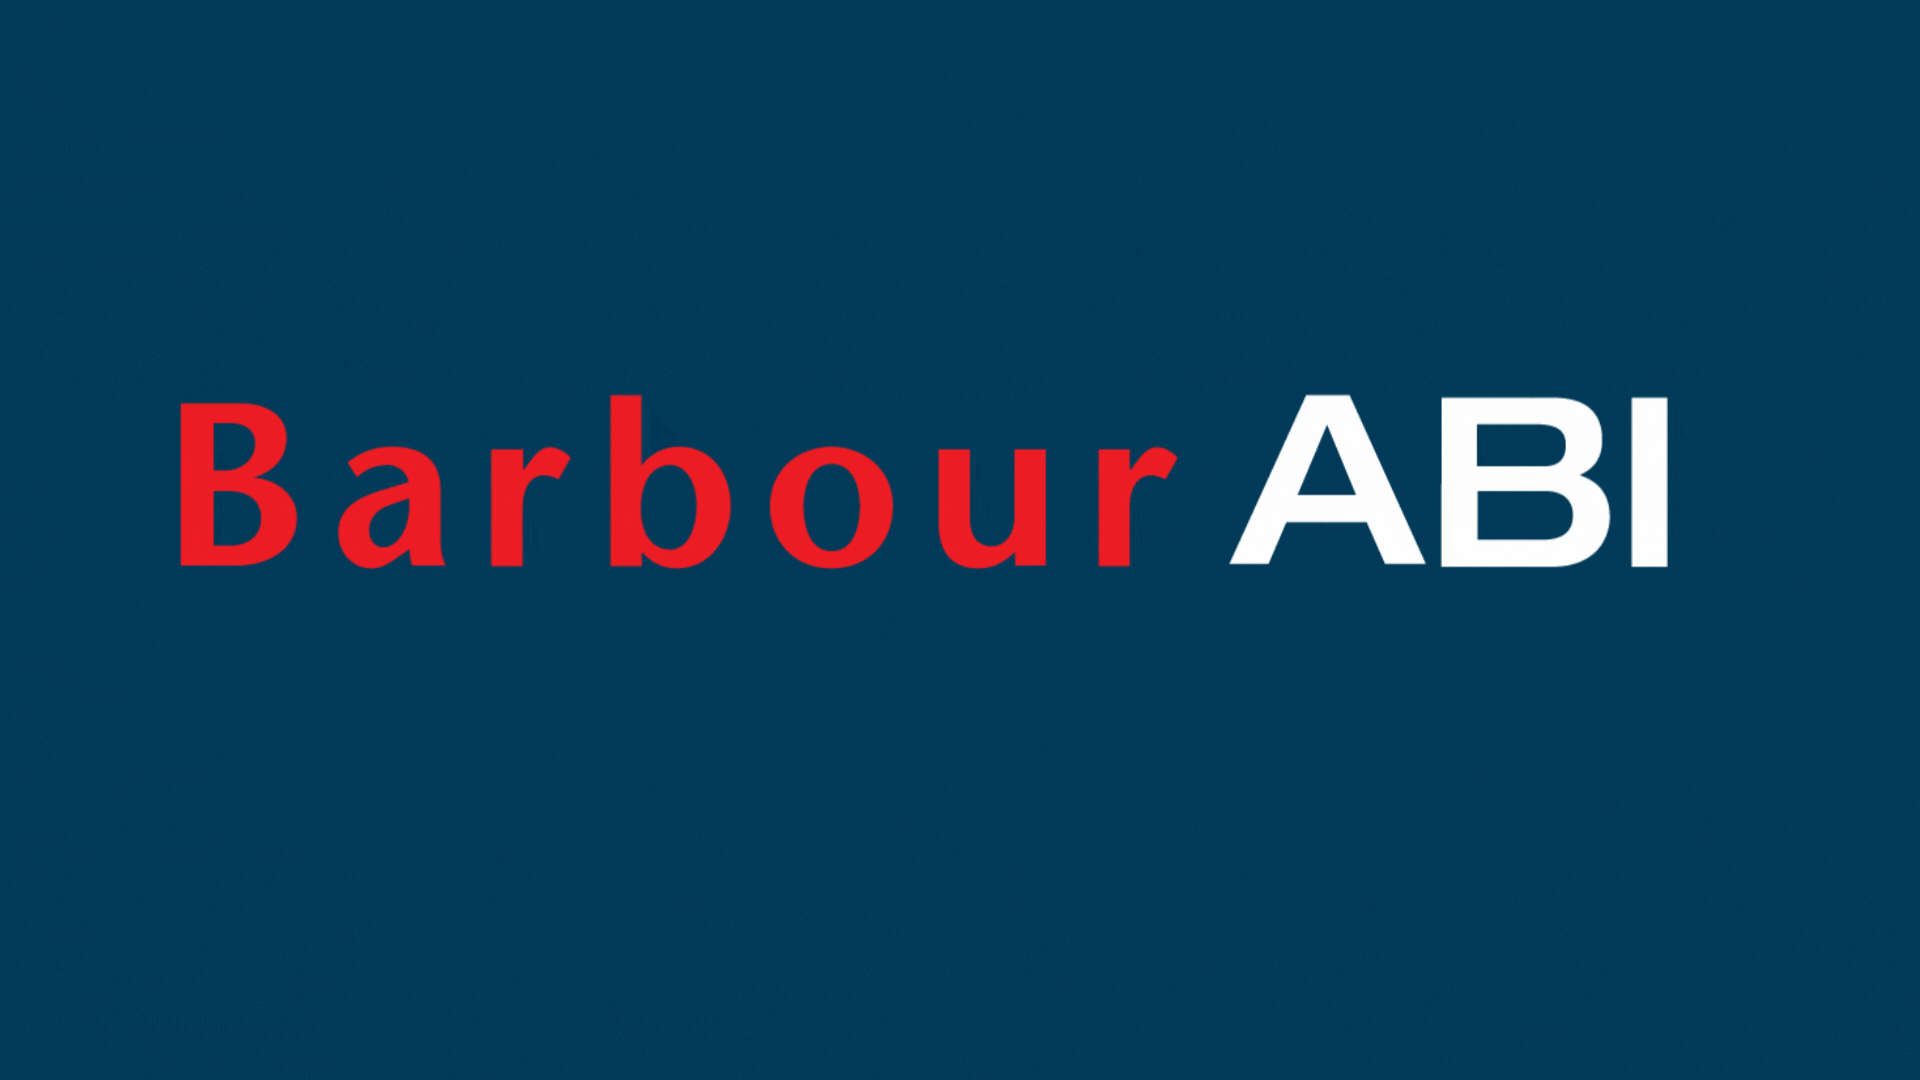 UKCW ANNOUNCES BARBOUR ABI AS MAIN STAGE SPONSOR AND INTELLIGENCE PARTNERS FOR LONDON 2024